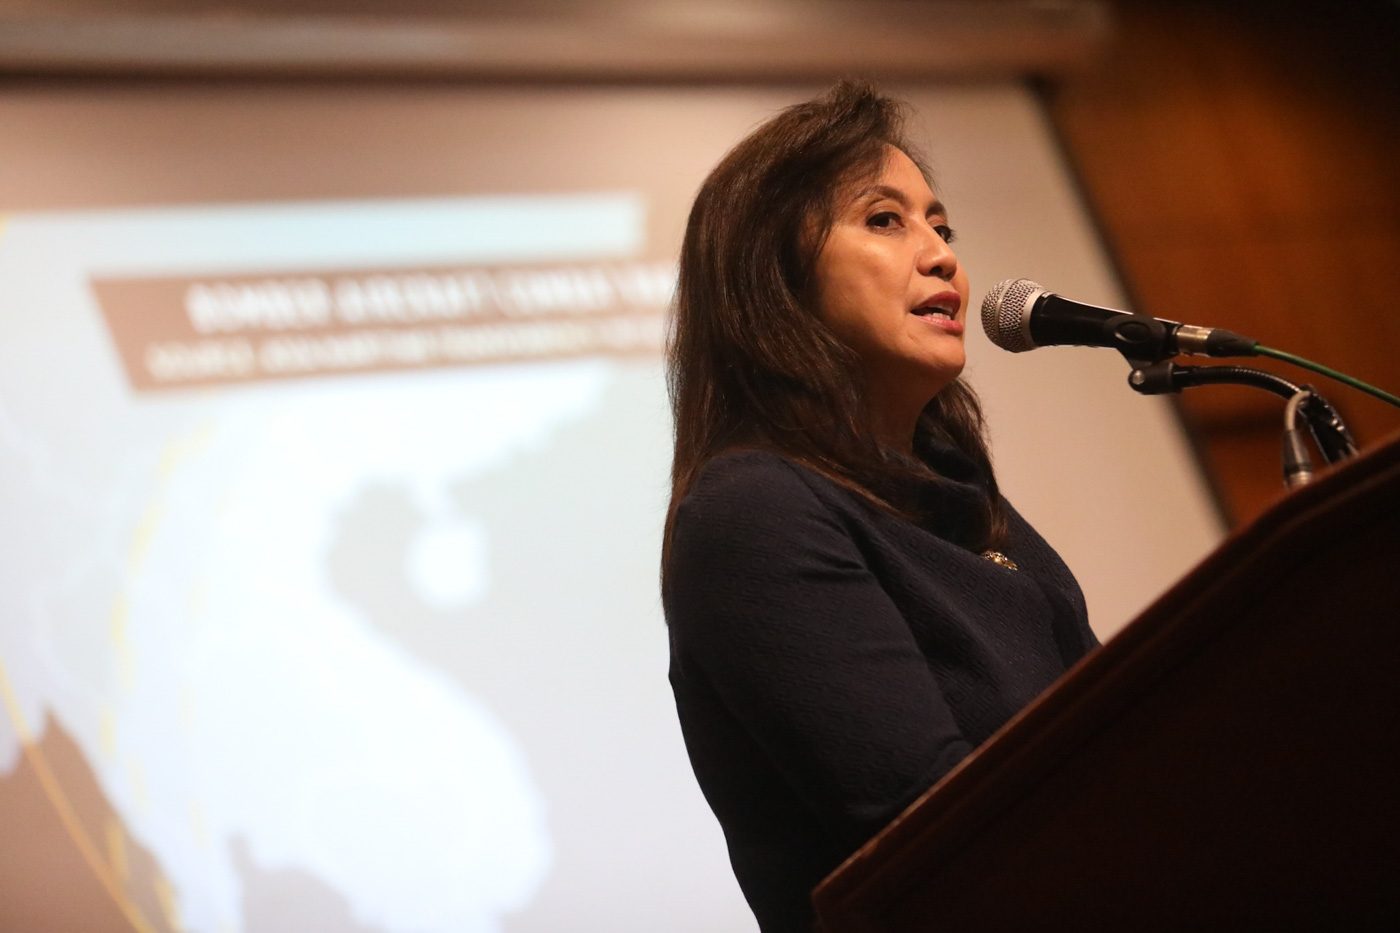 Charter change ‘untimely’ amid rising prices, killings – Robredo